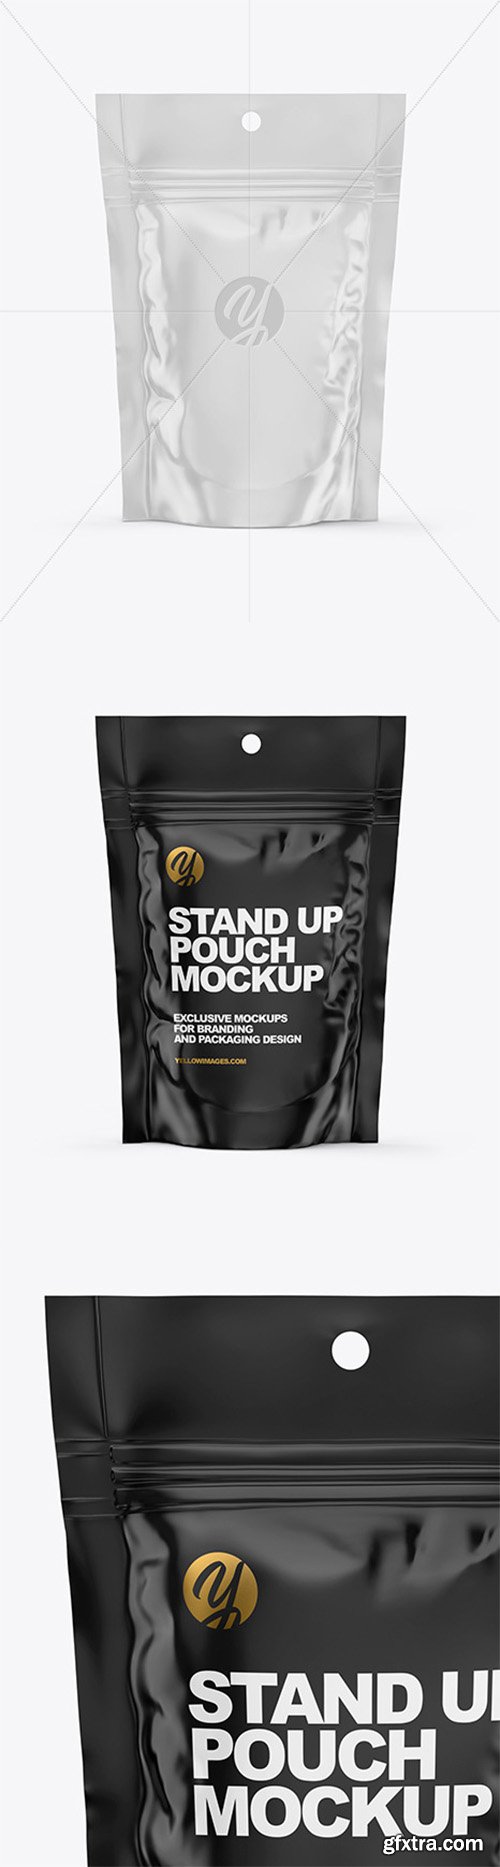 Glossy Vacuum Pouch Mockup 56085